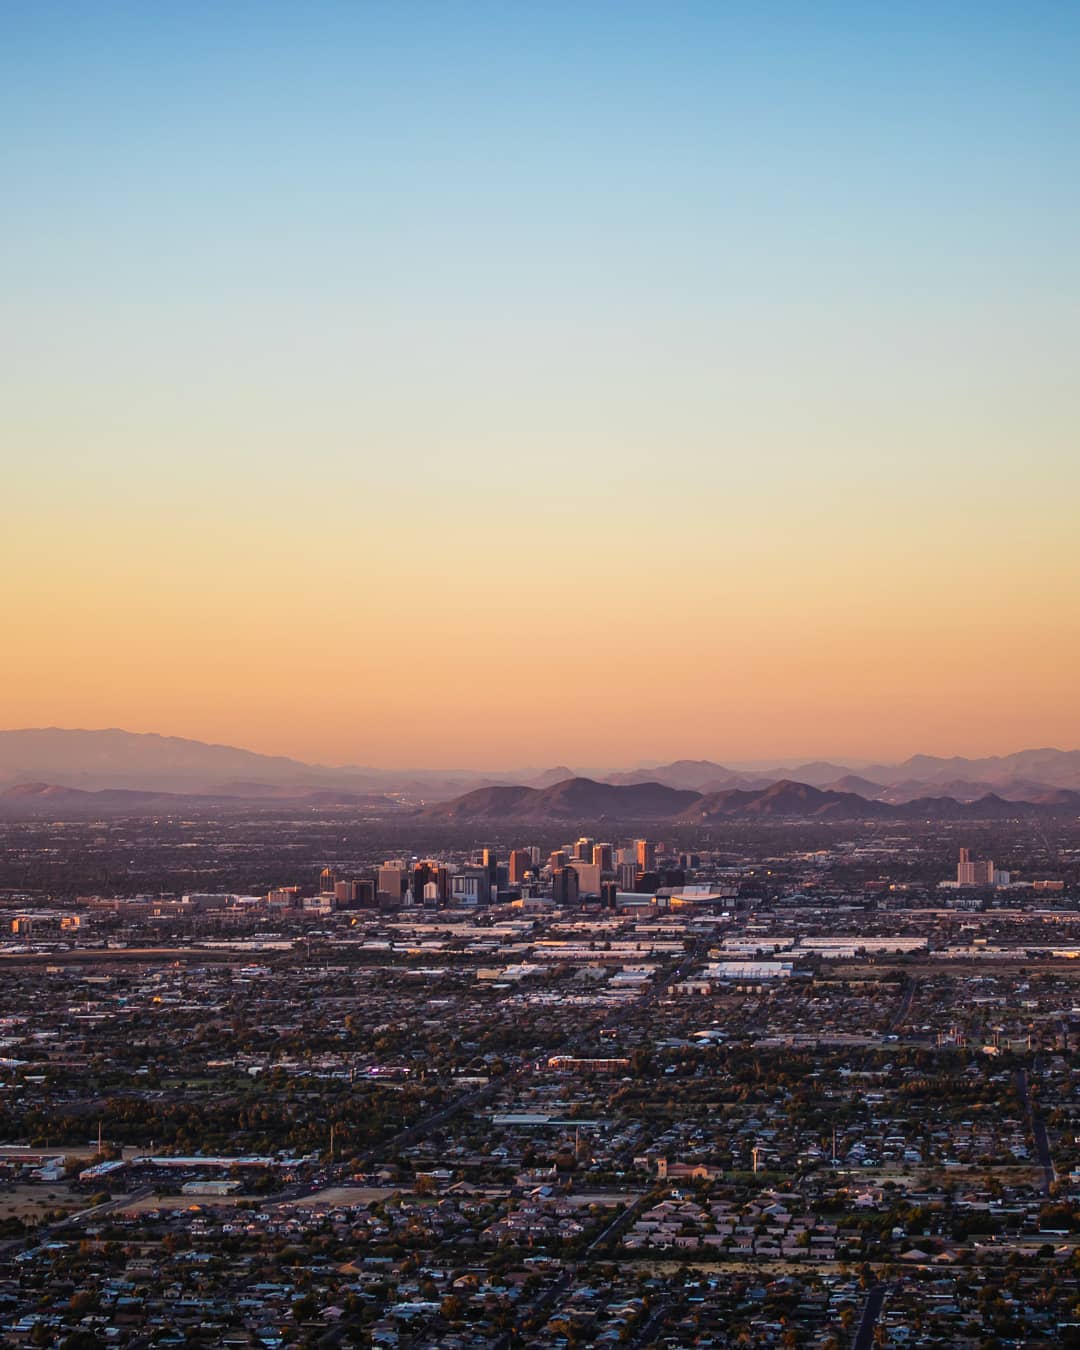 Skyline of mountains and buildings in Phoenix, AZ. Photo by Instagram user @maverick_shots